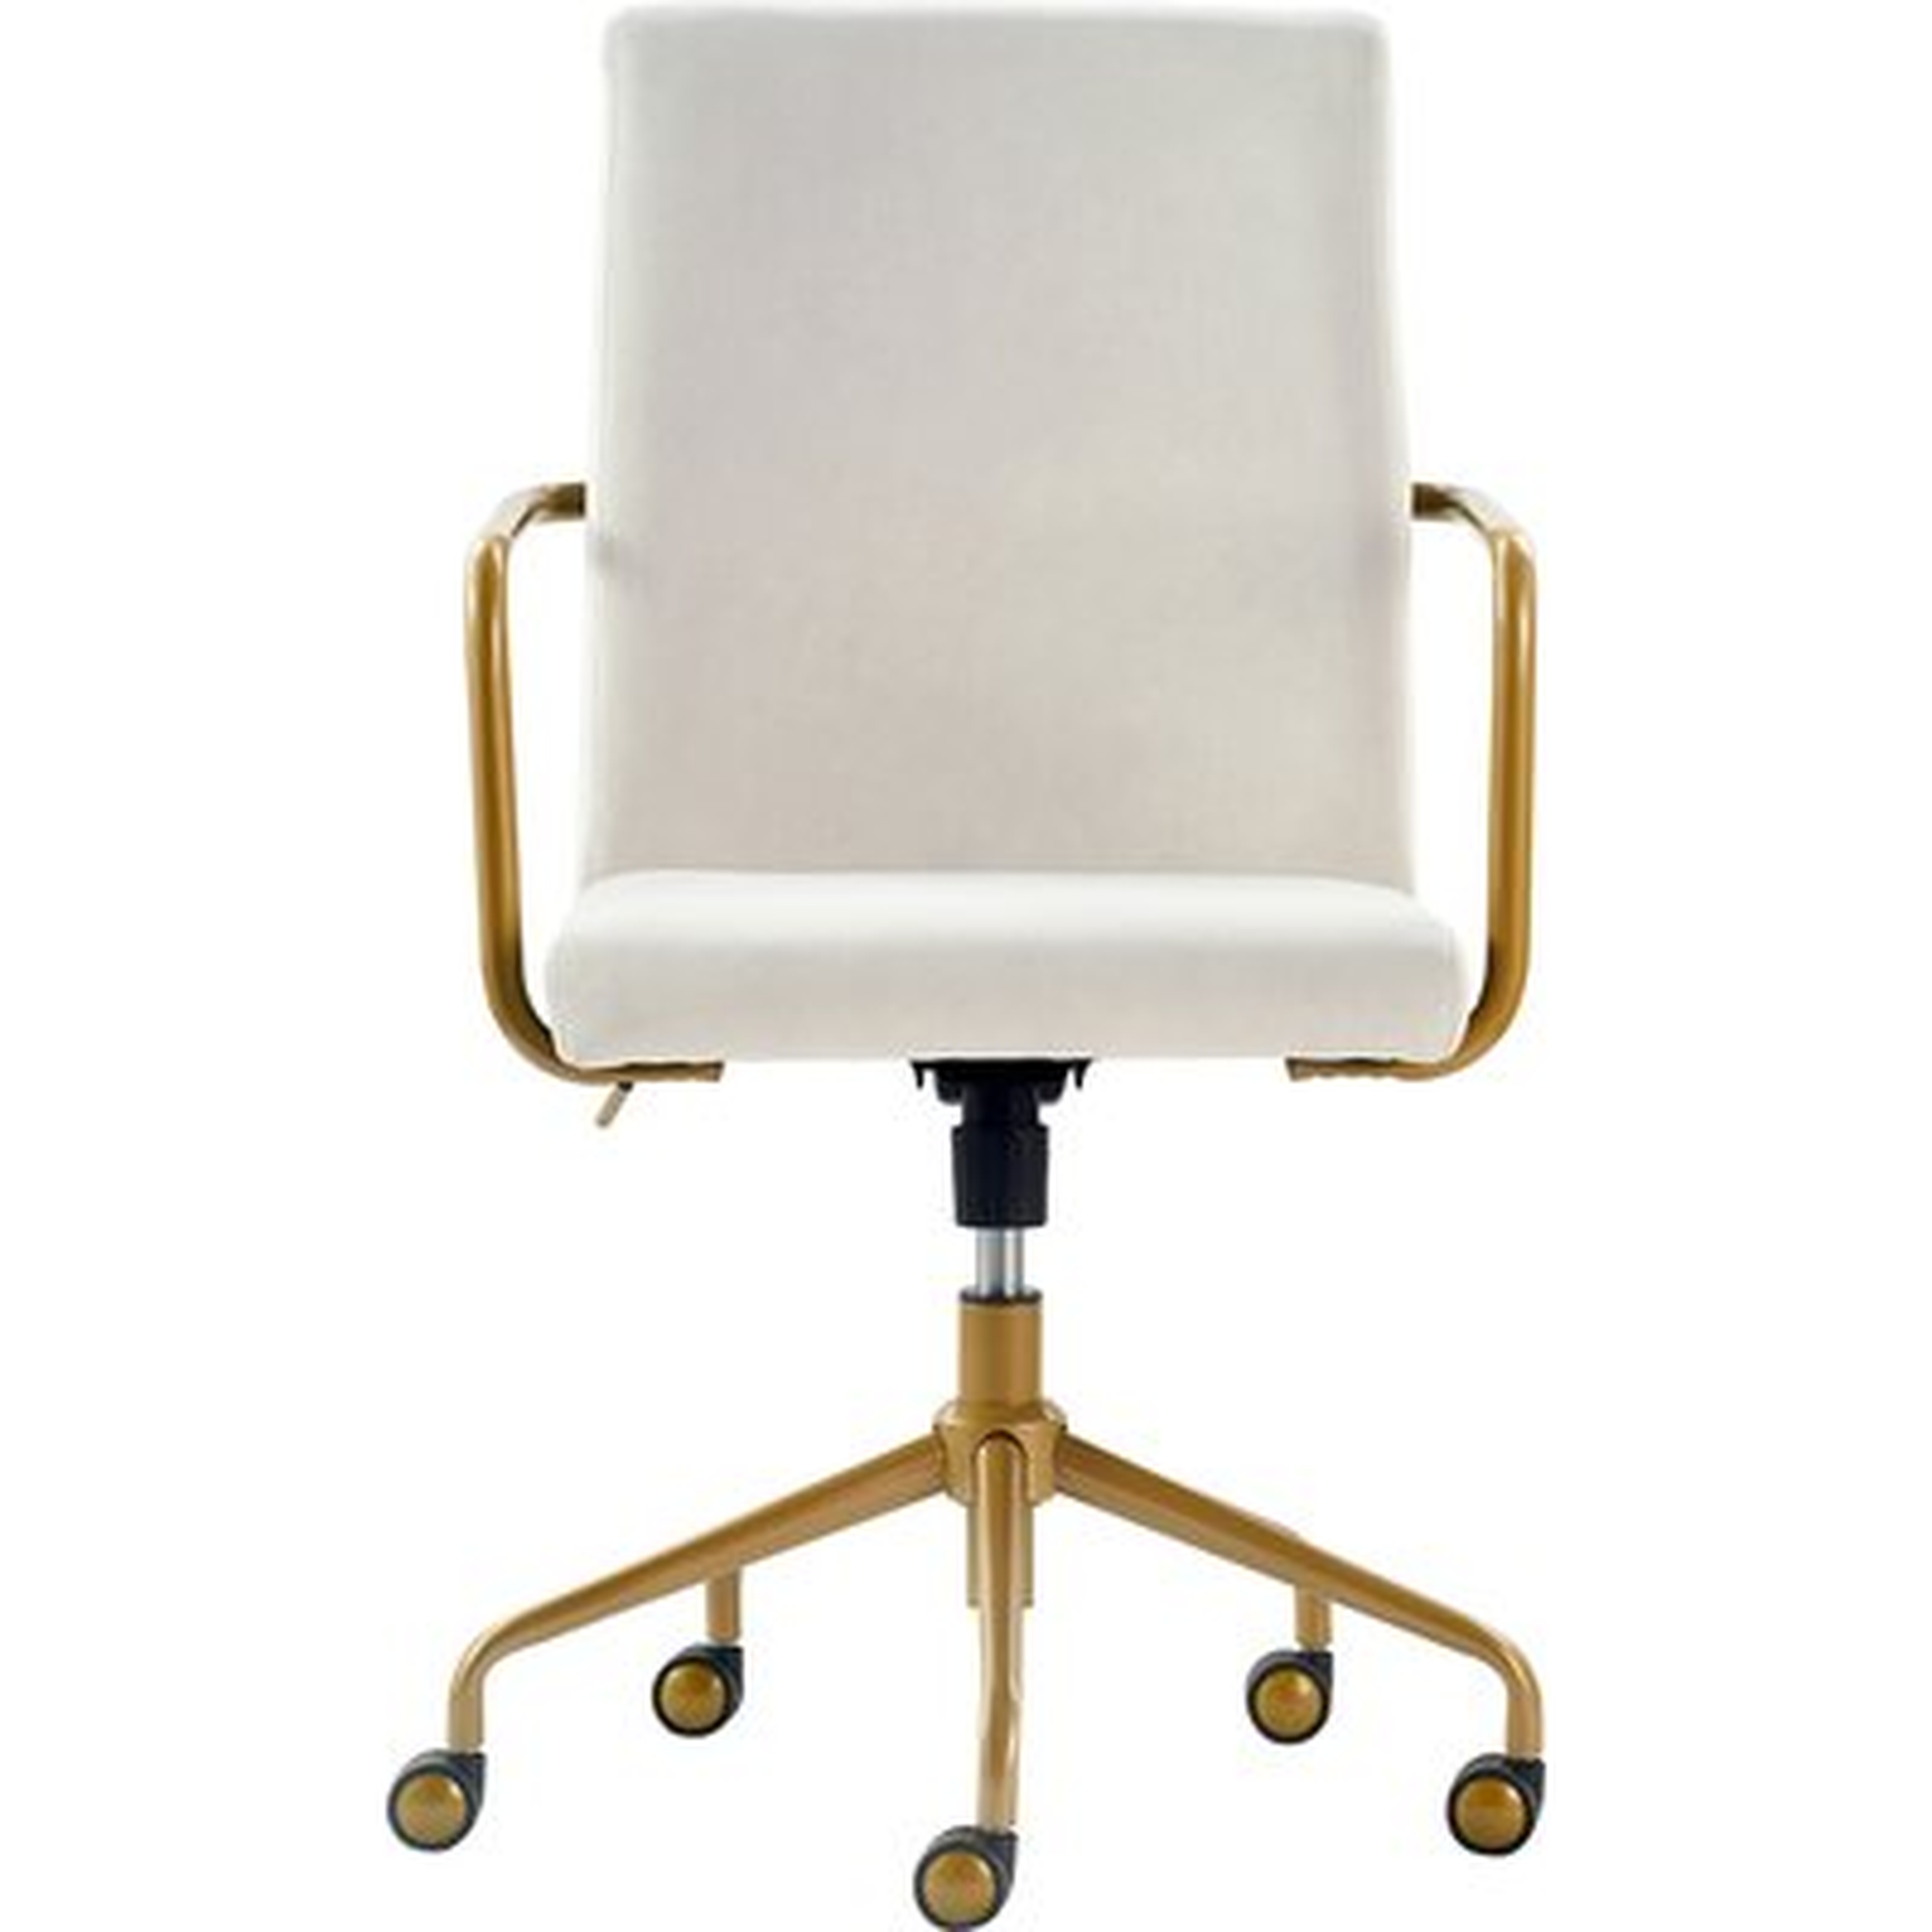 Giselle Conference Chair - Wayfair